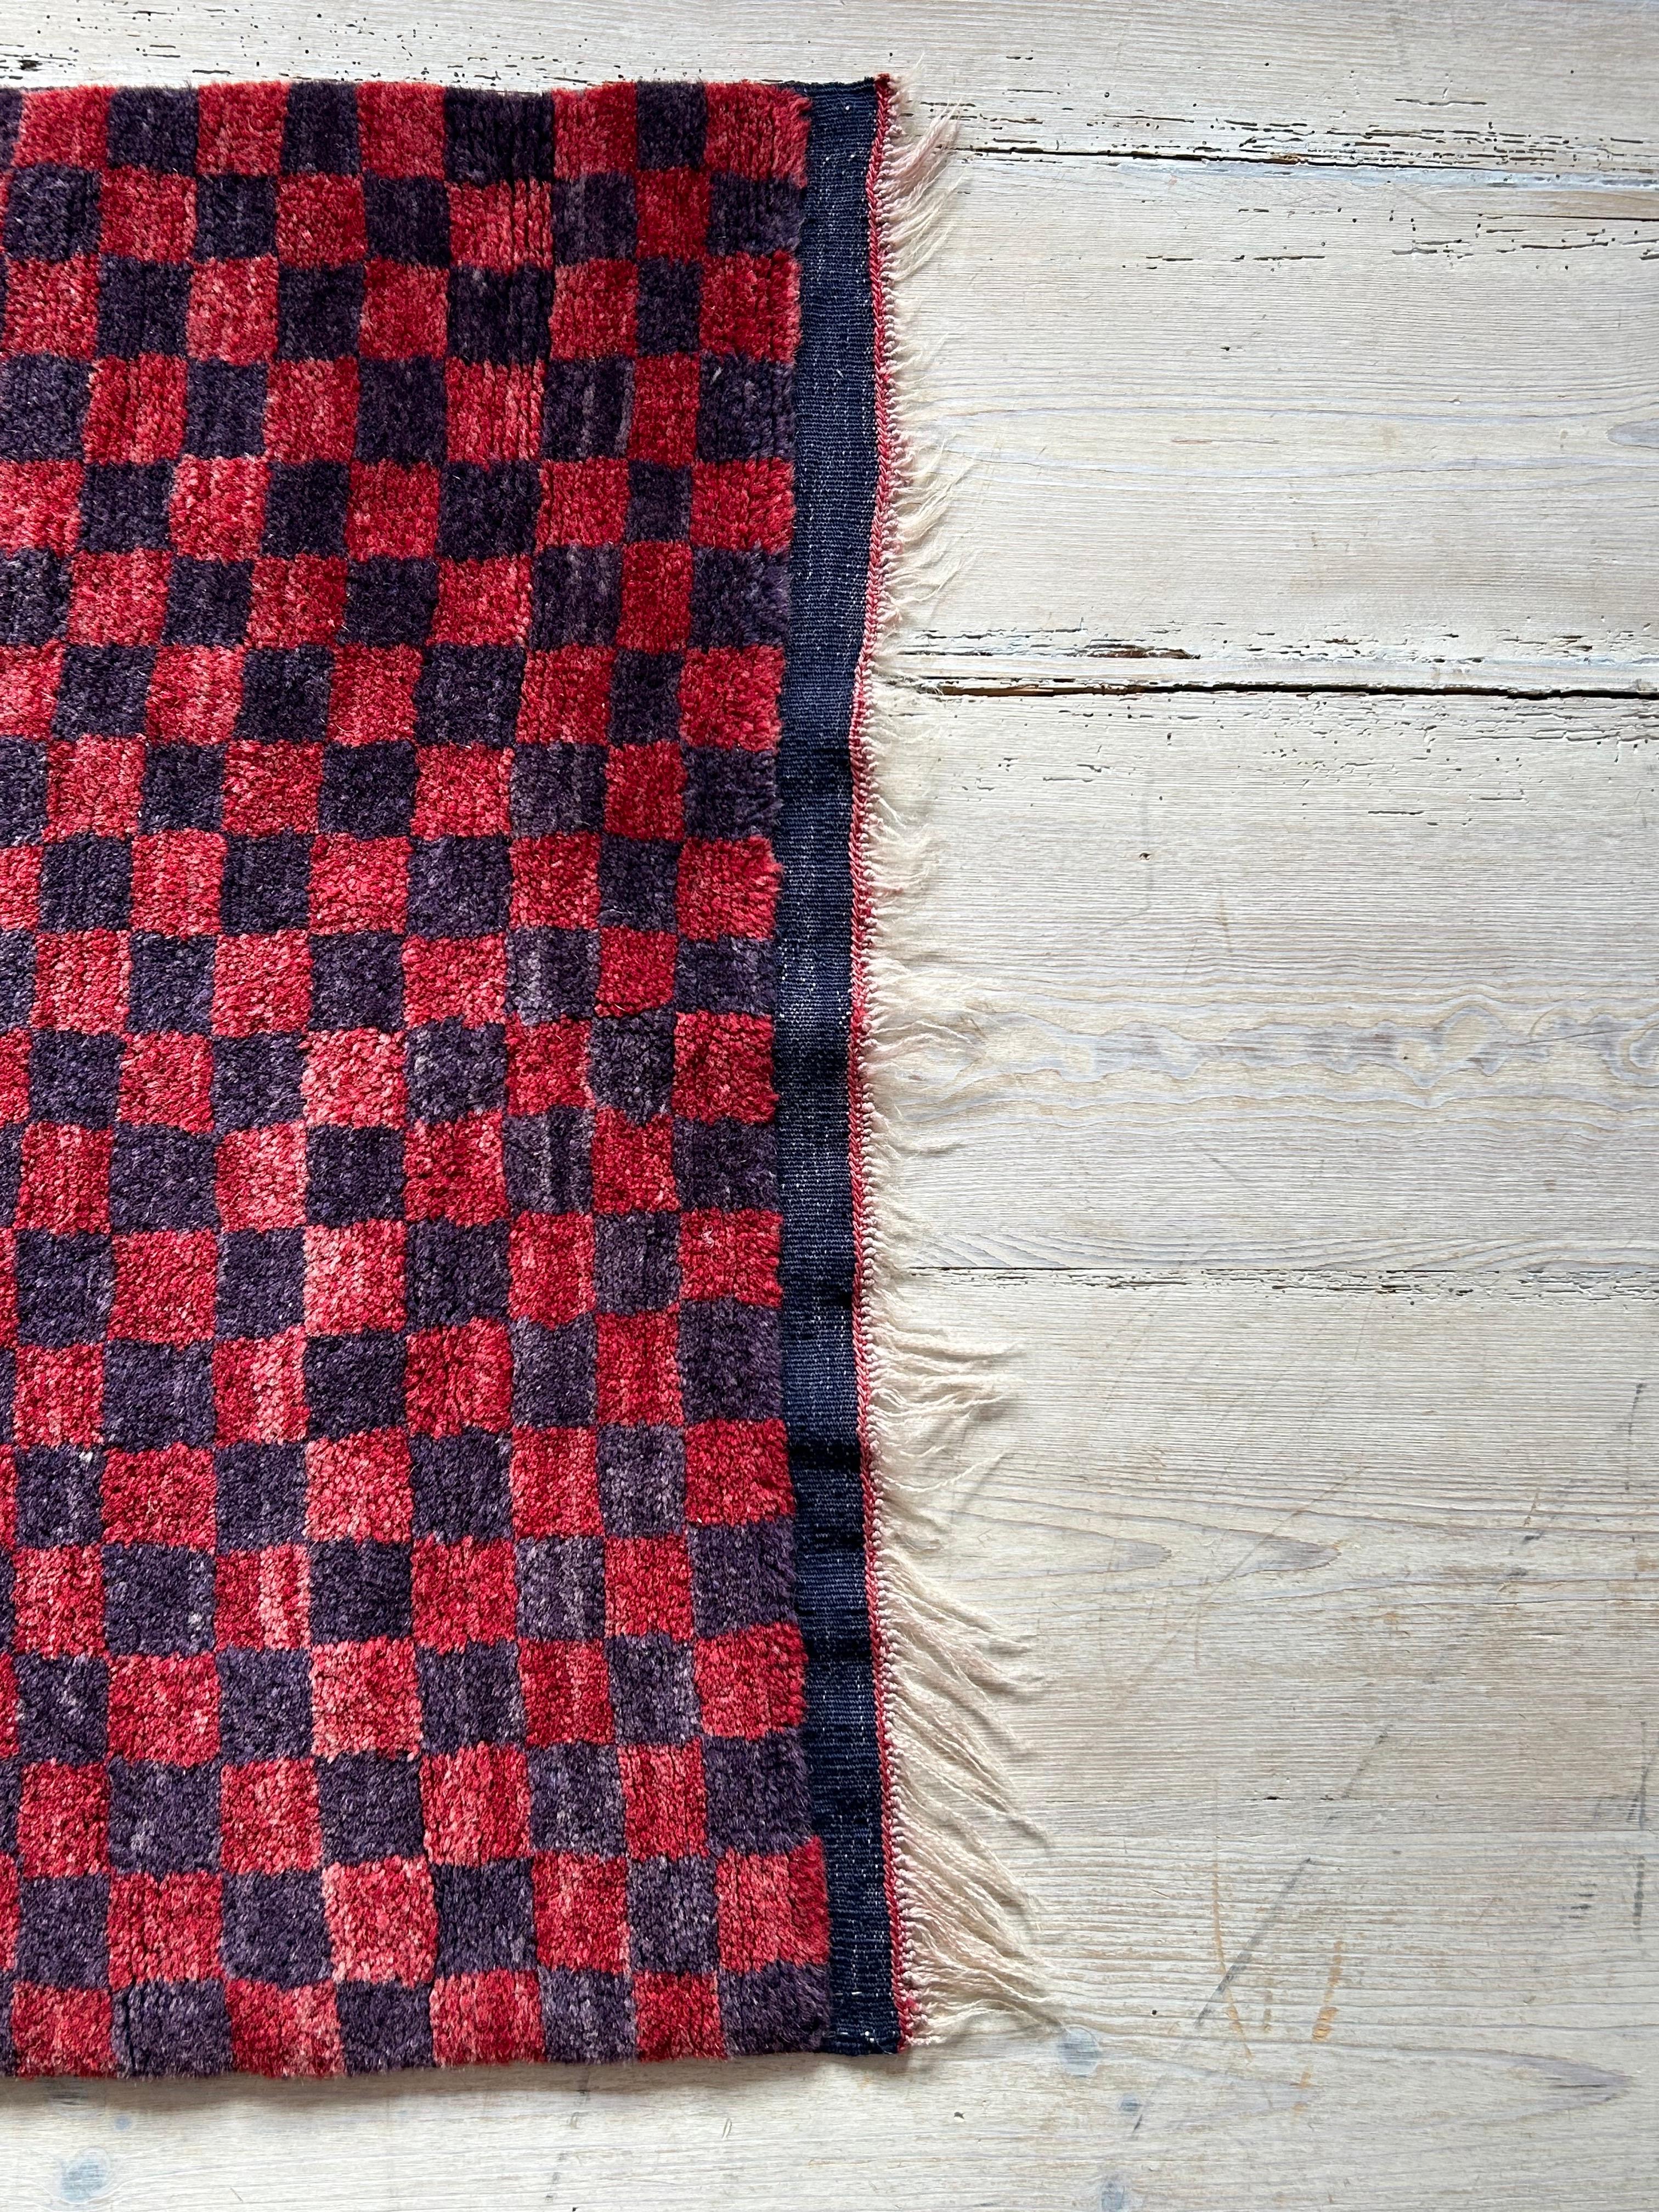 Vintage Tulu Rug with Red and Purple Check Pattern, Turkey, 20th Century For Sale 4